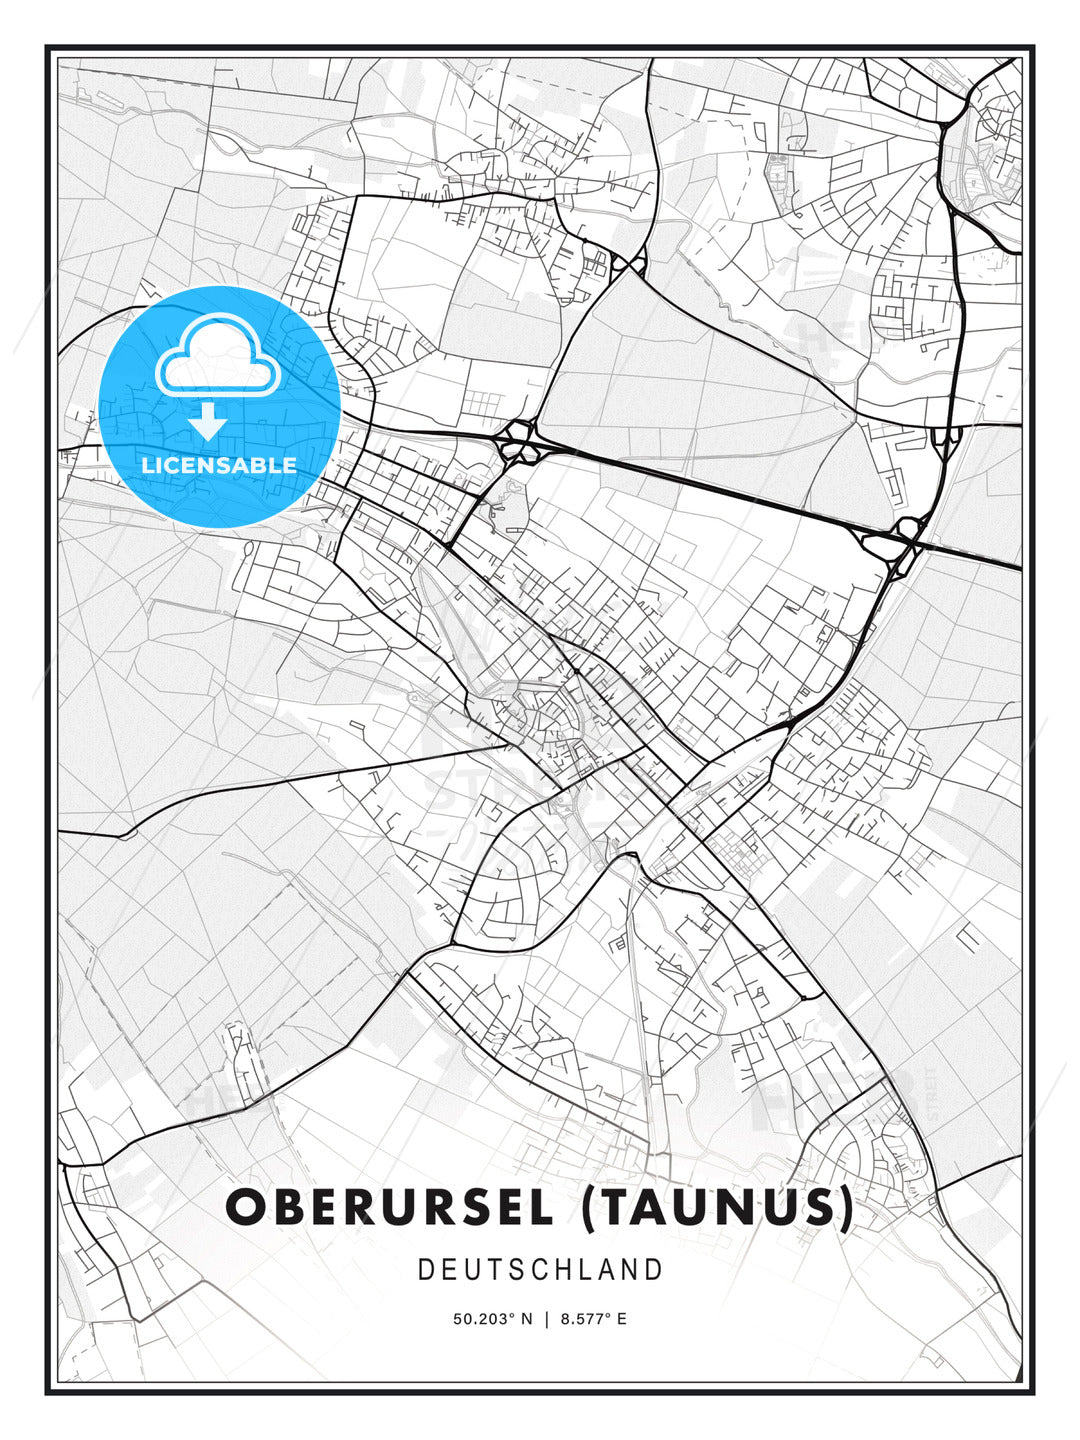 Oberursel (Taunus), Germany, Modern Print Template in Various Formats - HEBSTREITS Sketches